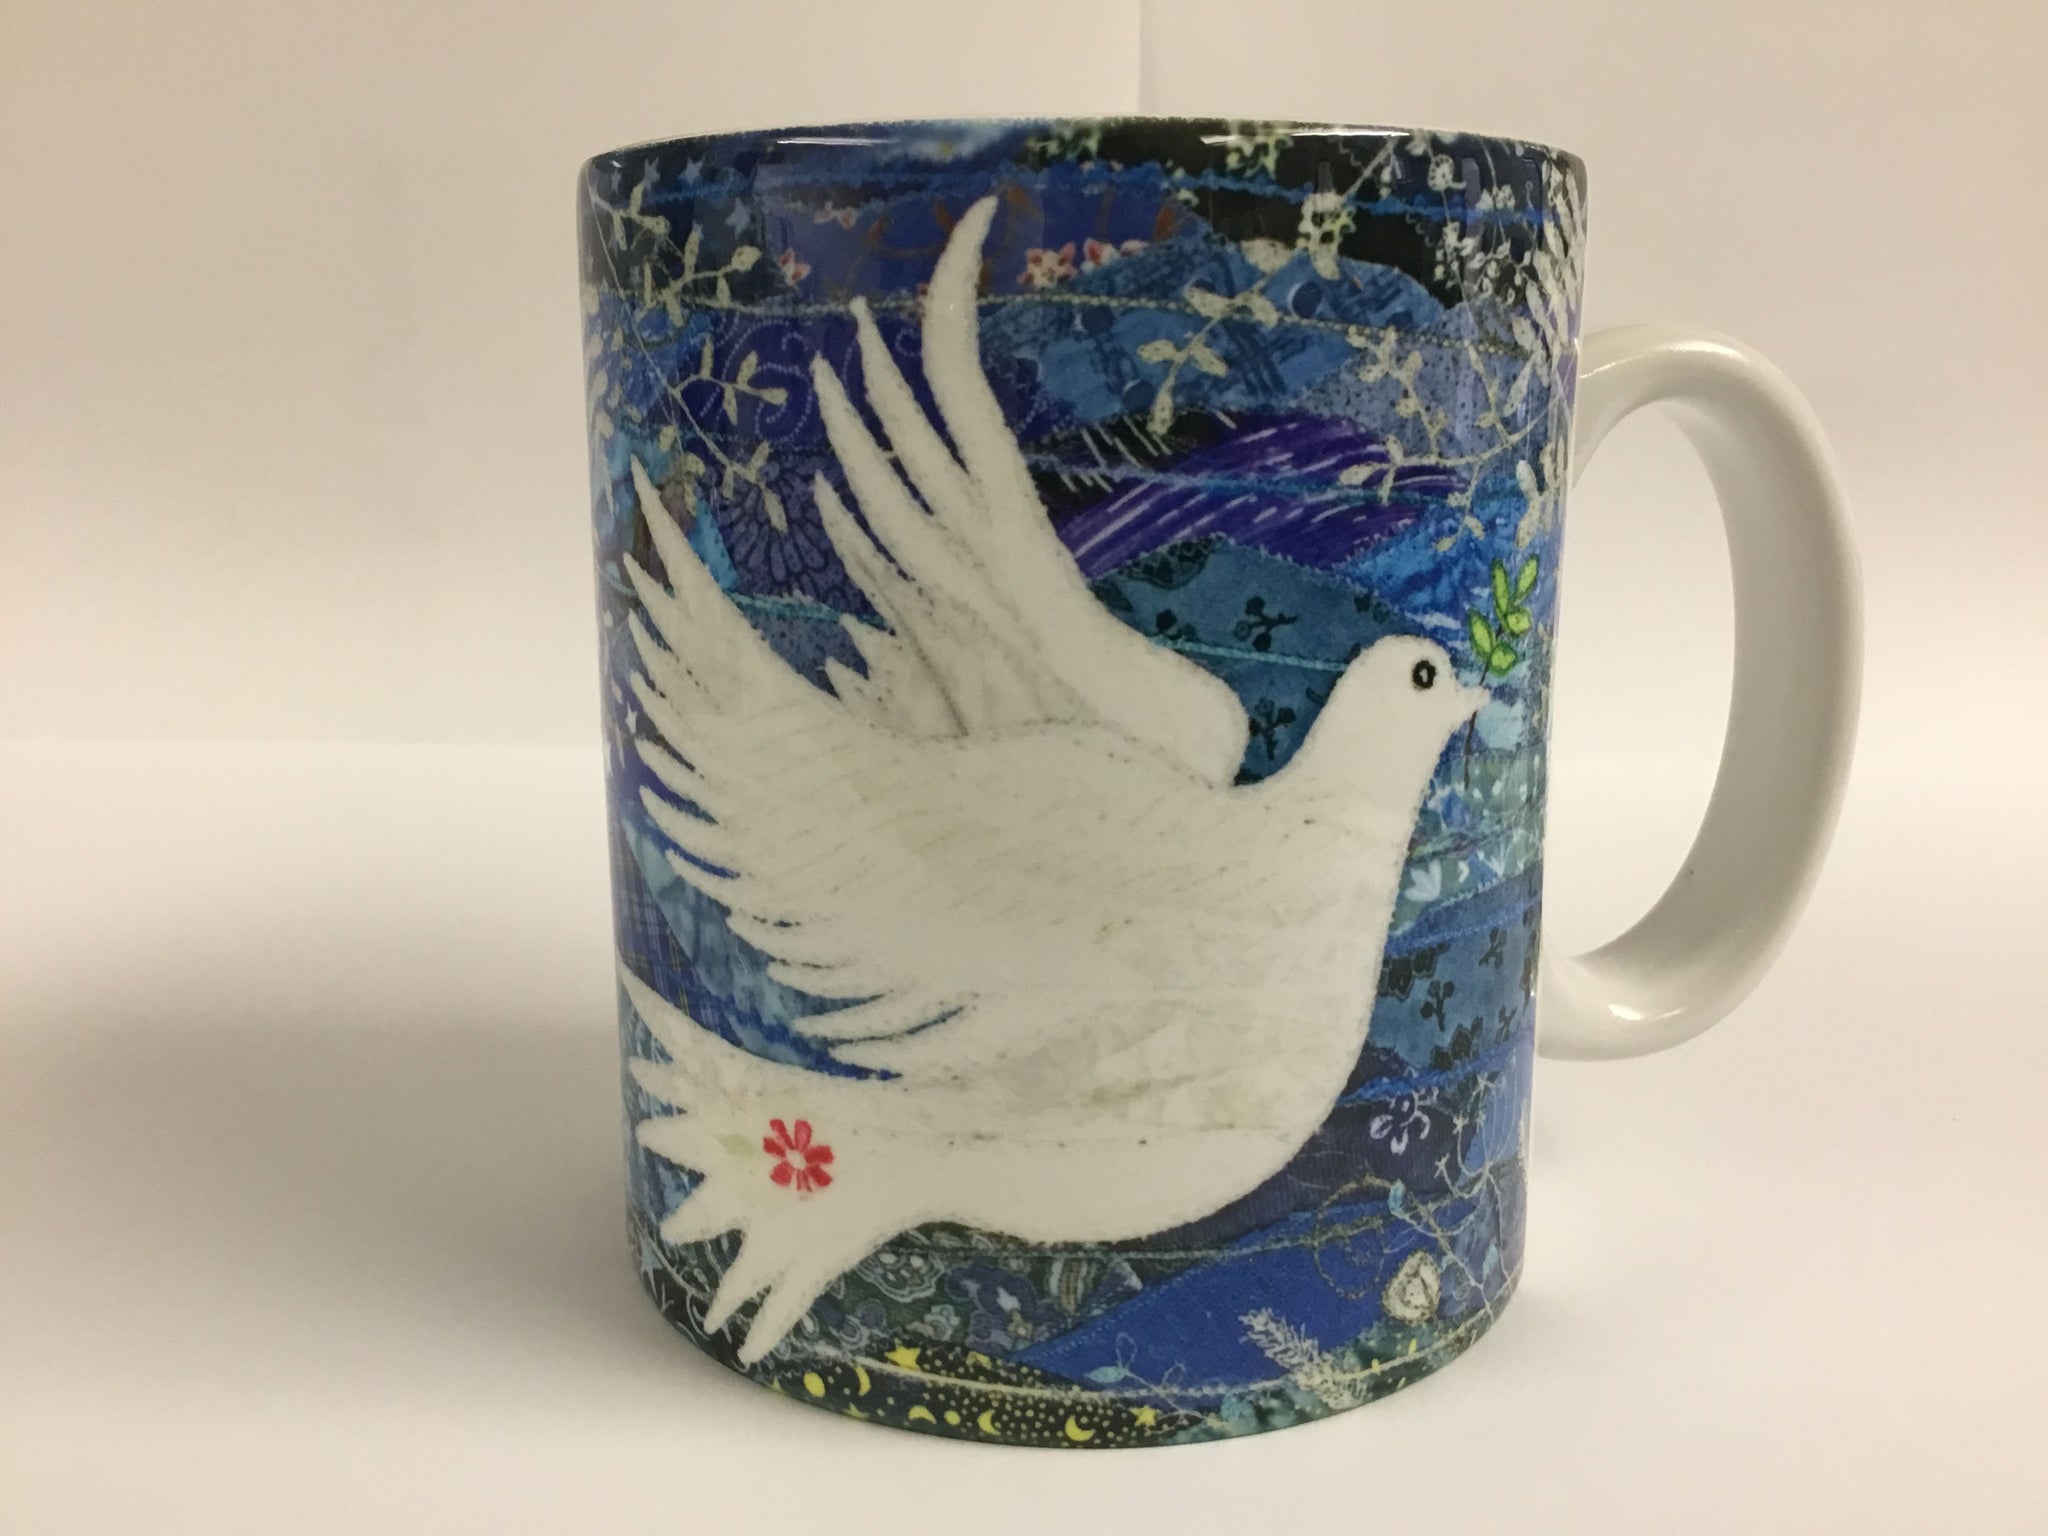 'The Dove' Mug by Josie Russell